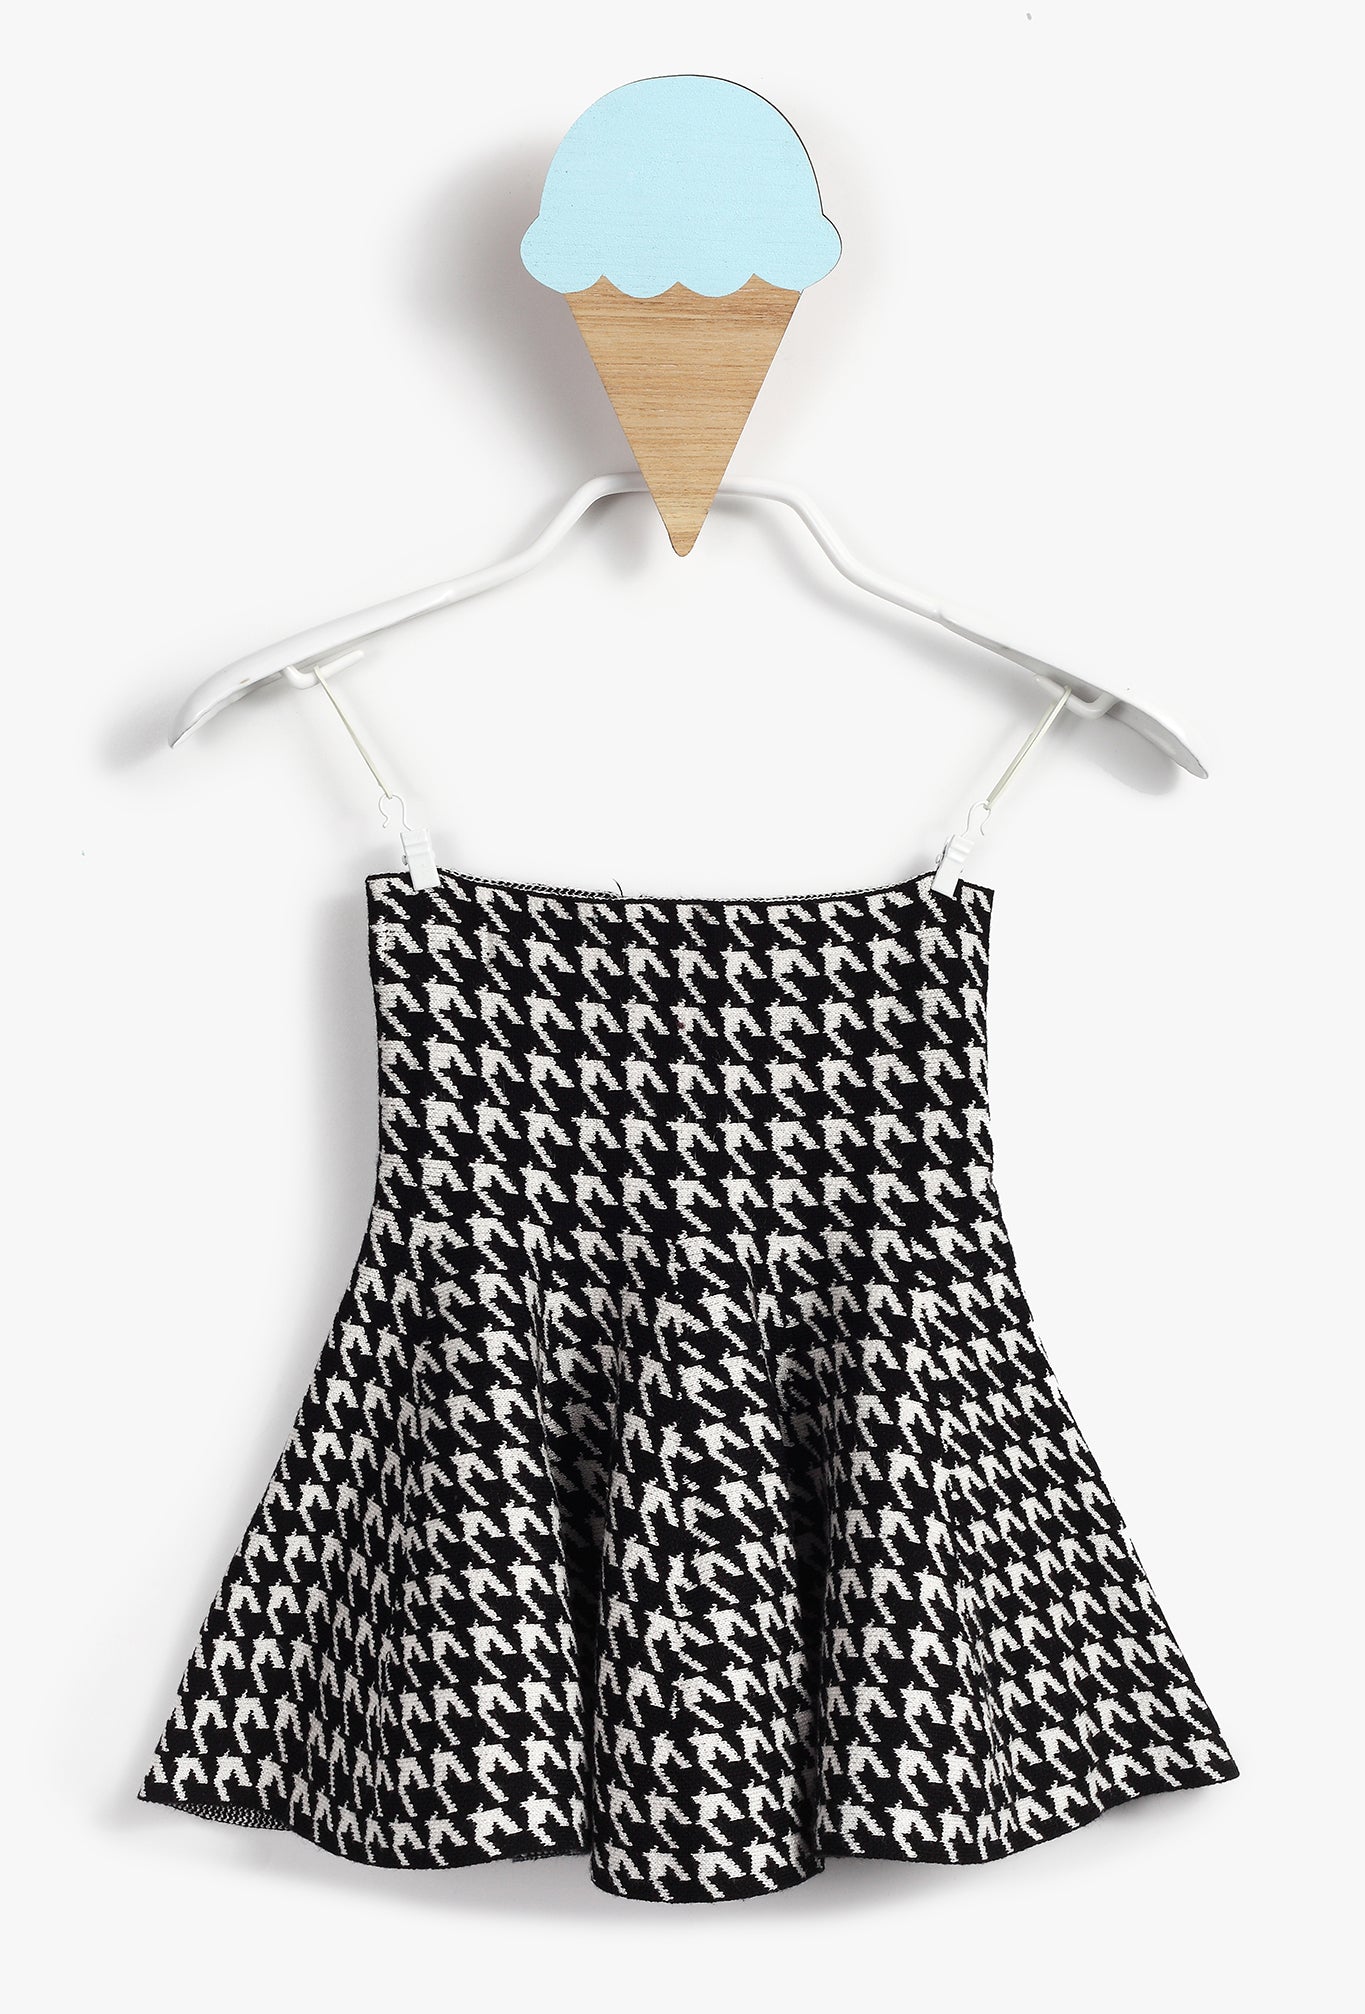 Houndstooth Knit Baby Girl Shirt 